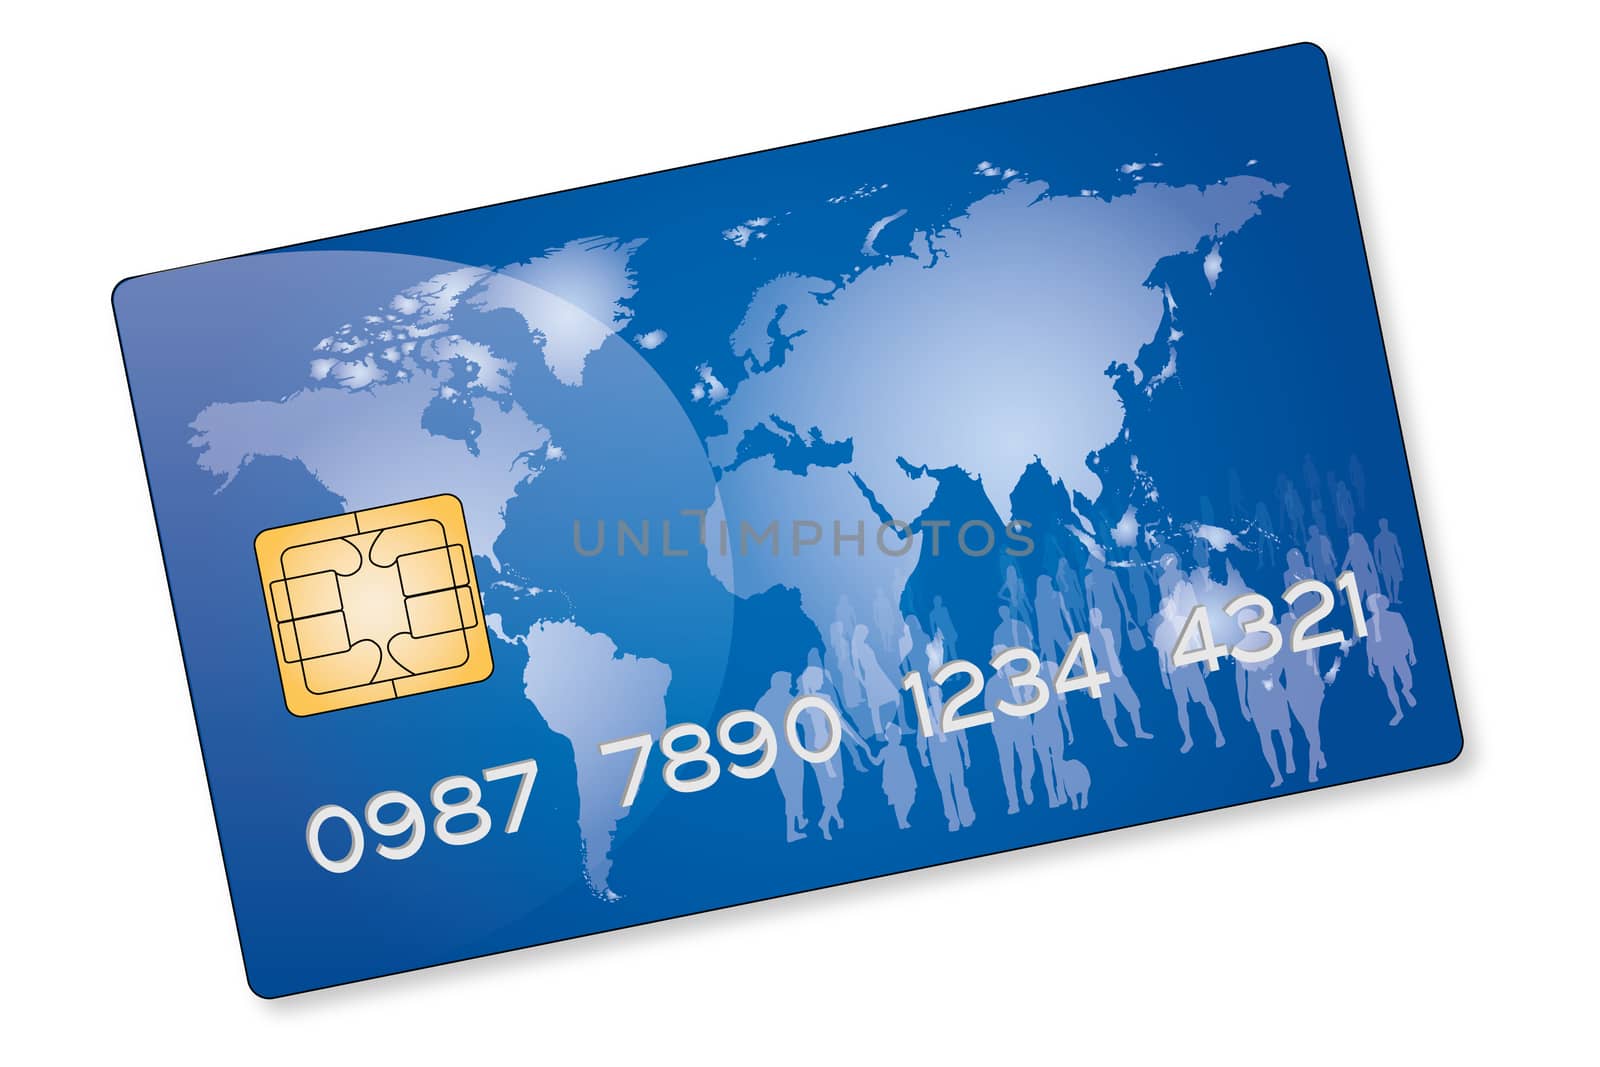 drawing of a blue credit card with a crowd of people on a world map